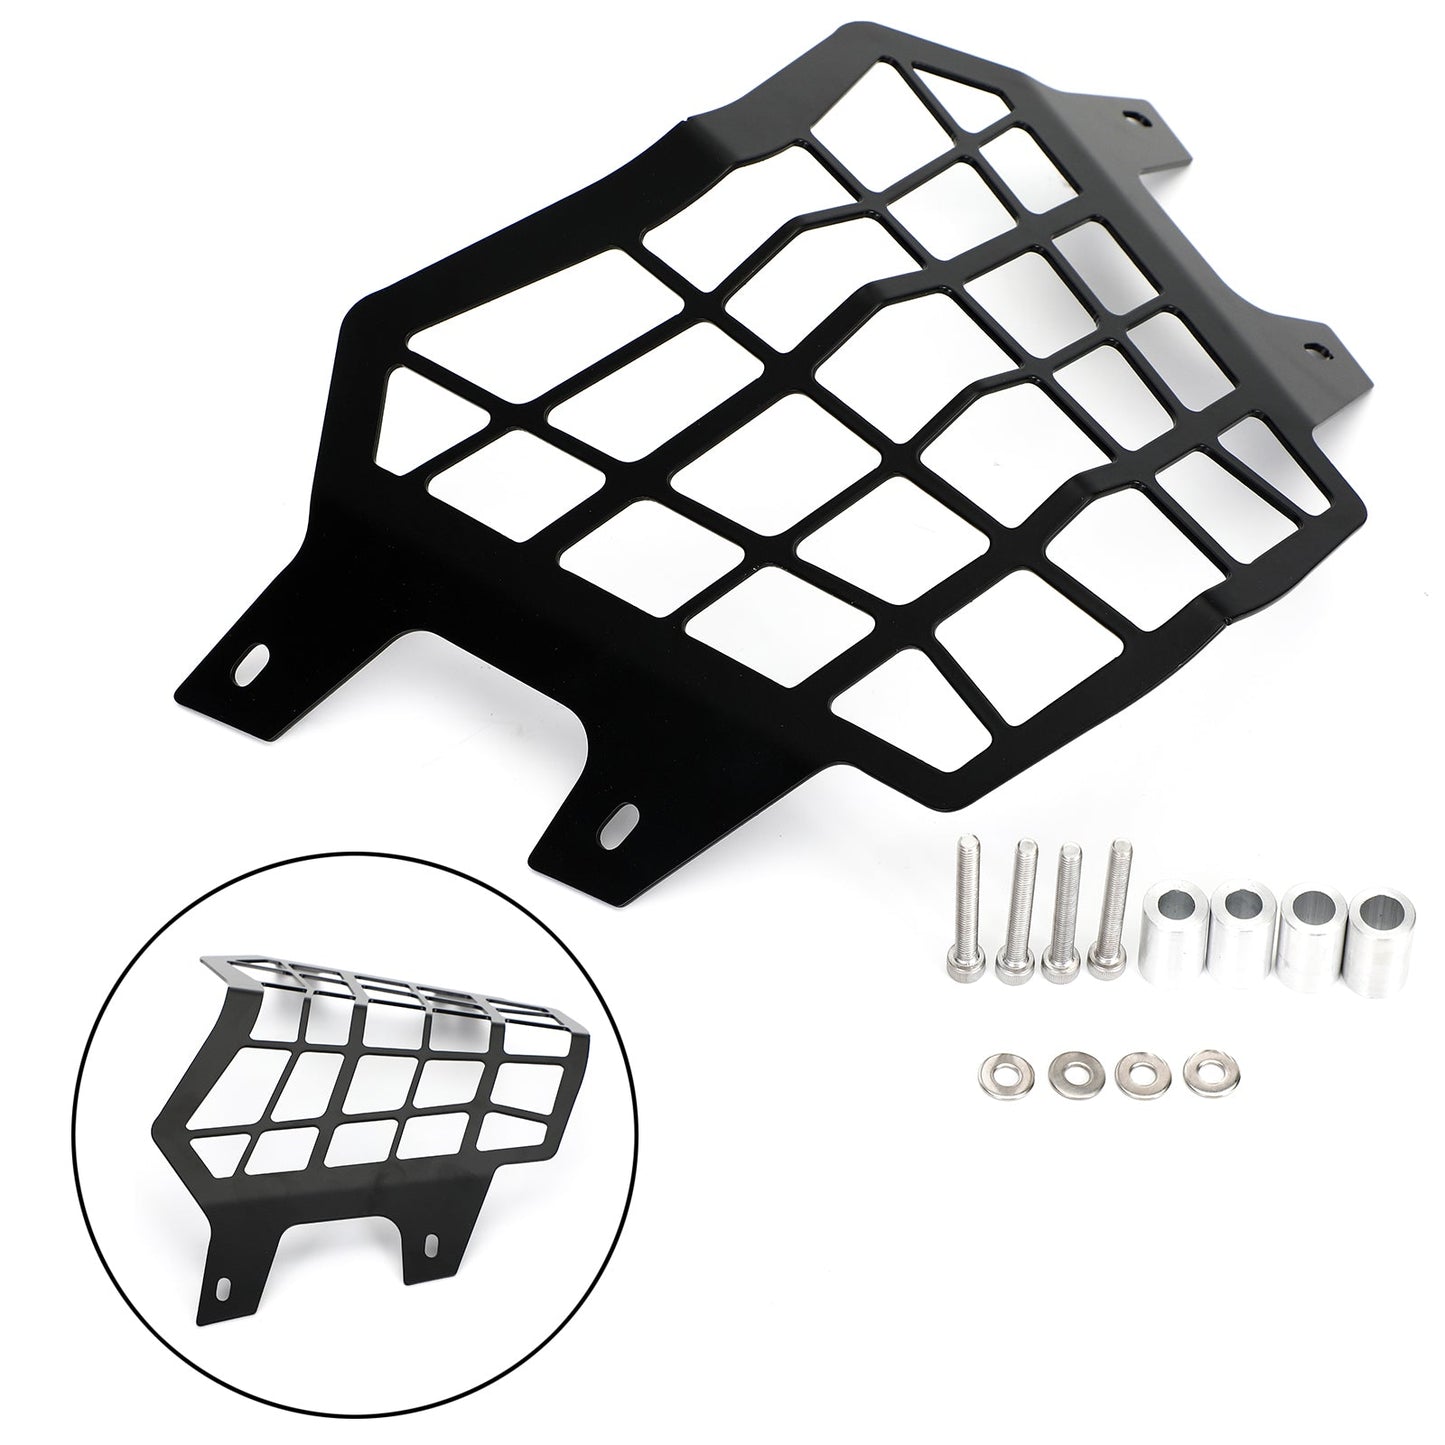 Headlight Grille Guard Cover Protector Fit For Yamaha Tenere 700 Xtz700 19-21